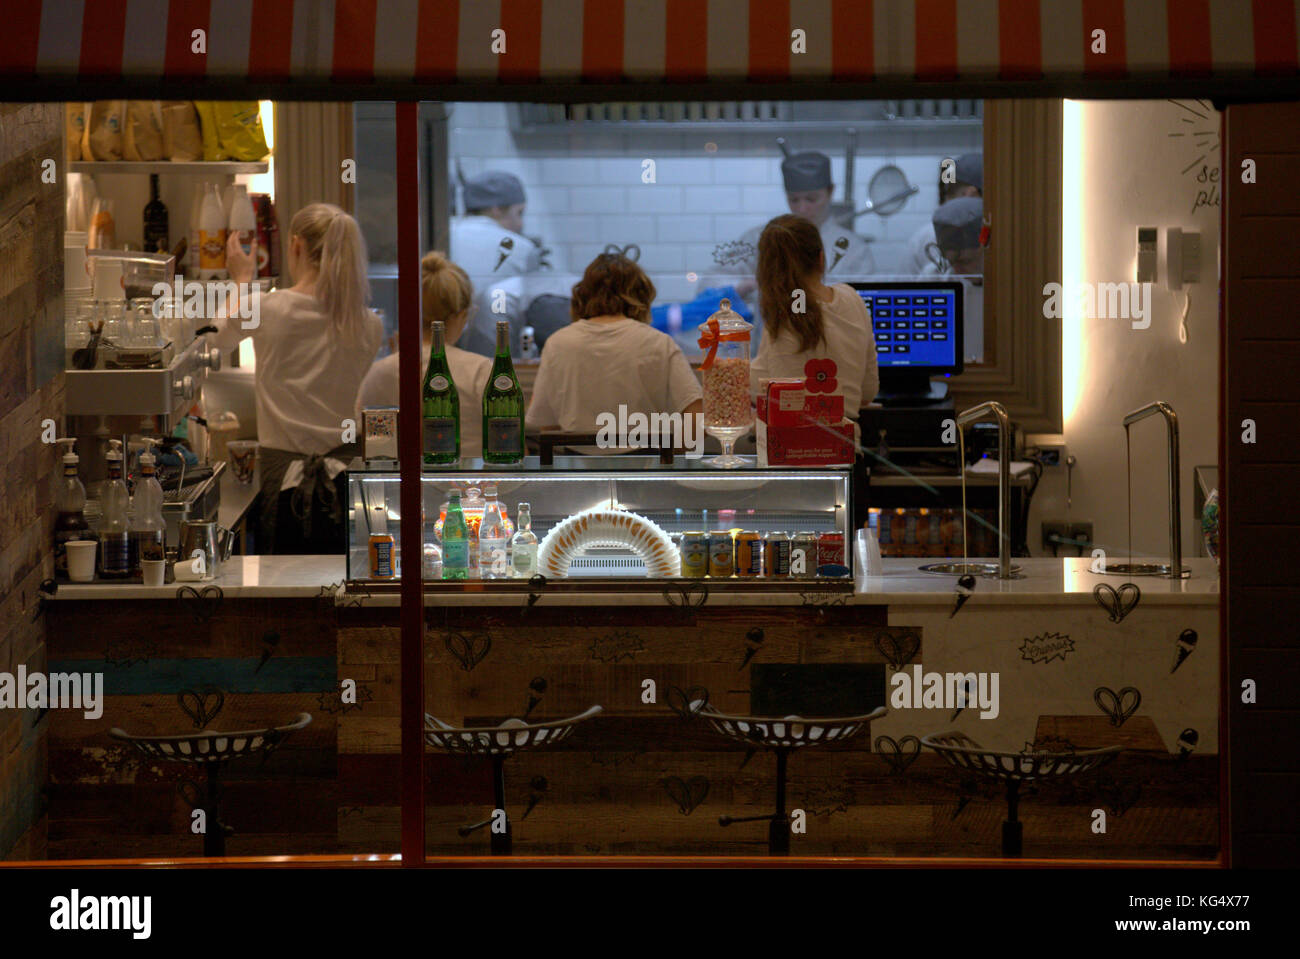 fast food restaurant staff workers window from the street cafe customers at night candid interior lit scene Stock Photo